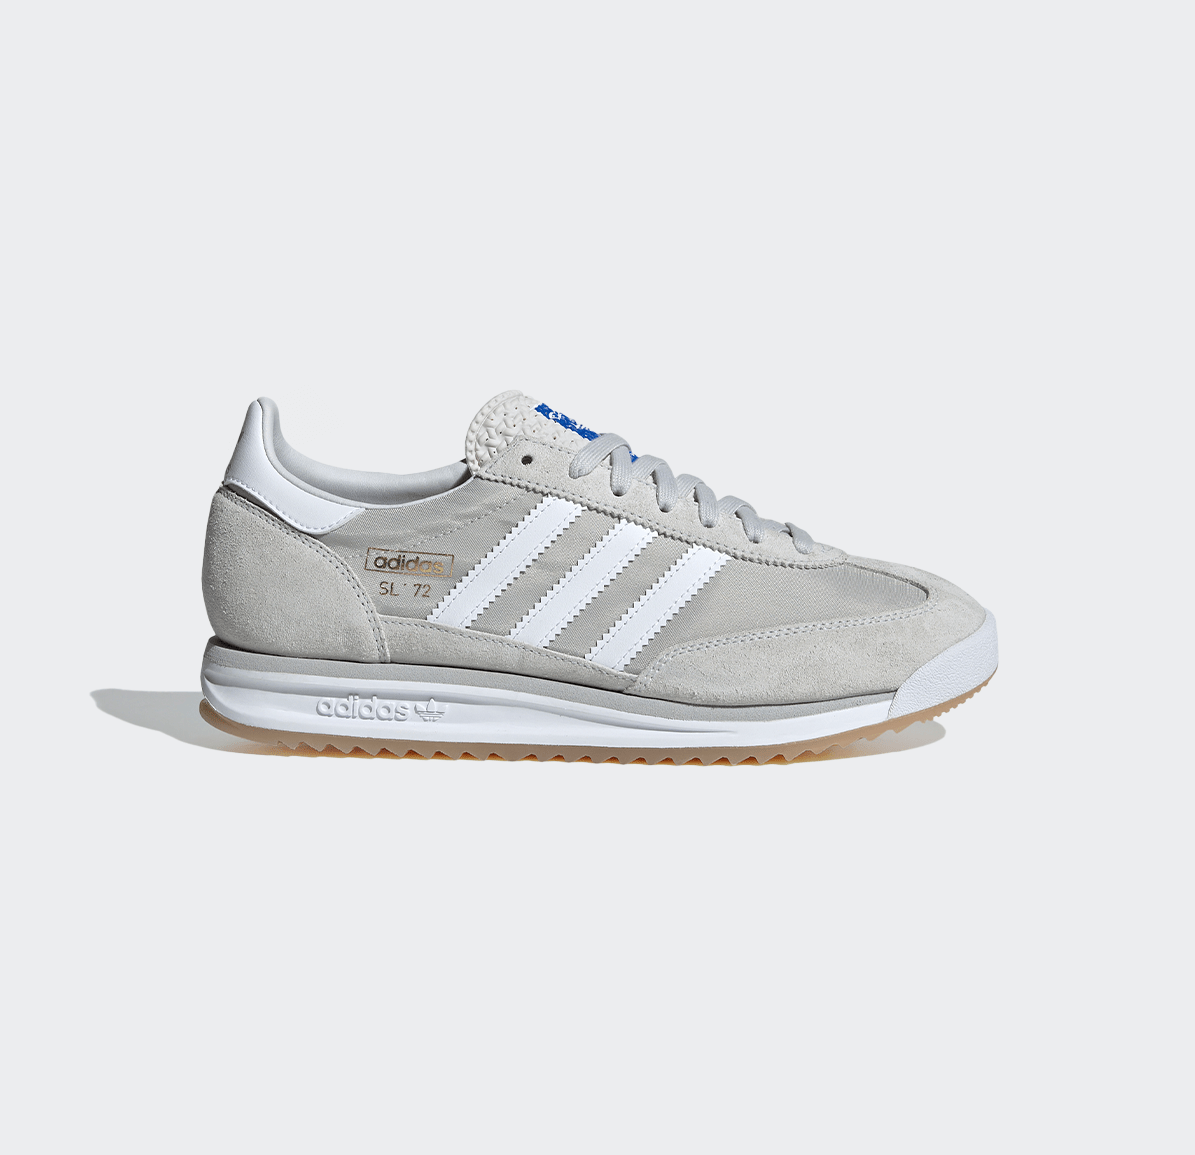 Adidas SL 72 RS - Grey One/Cloud White/Crystal White - Adidas - State Of Play